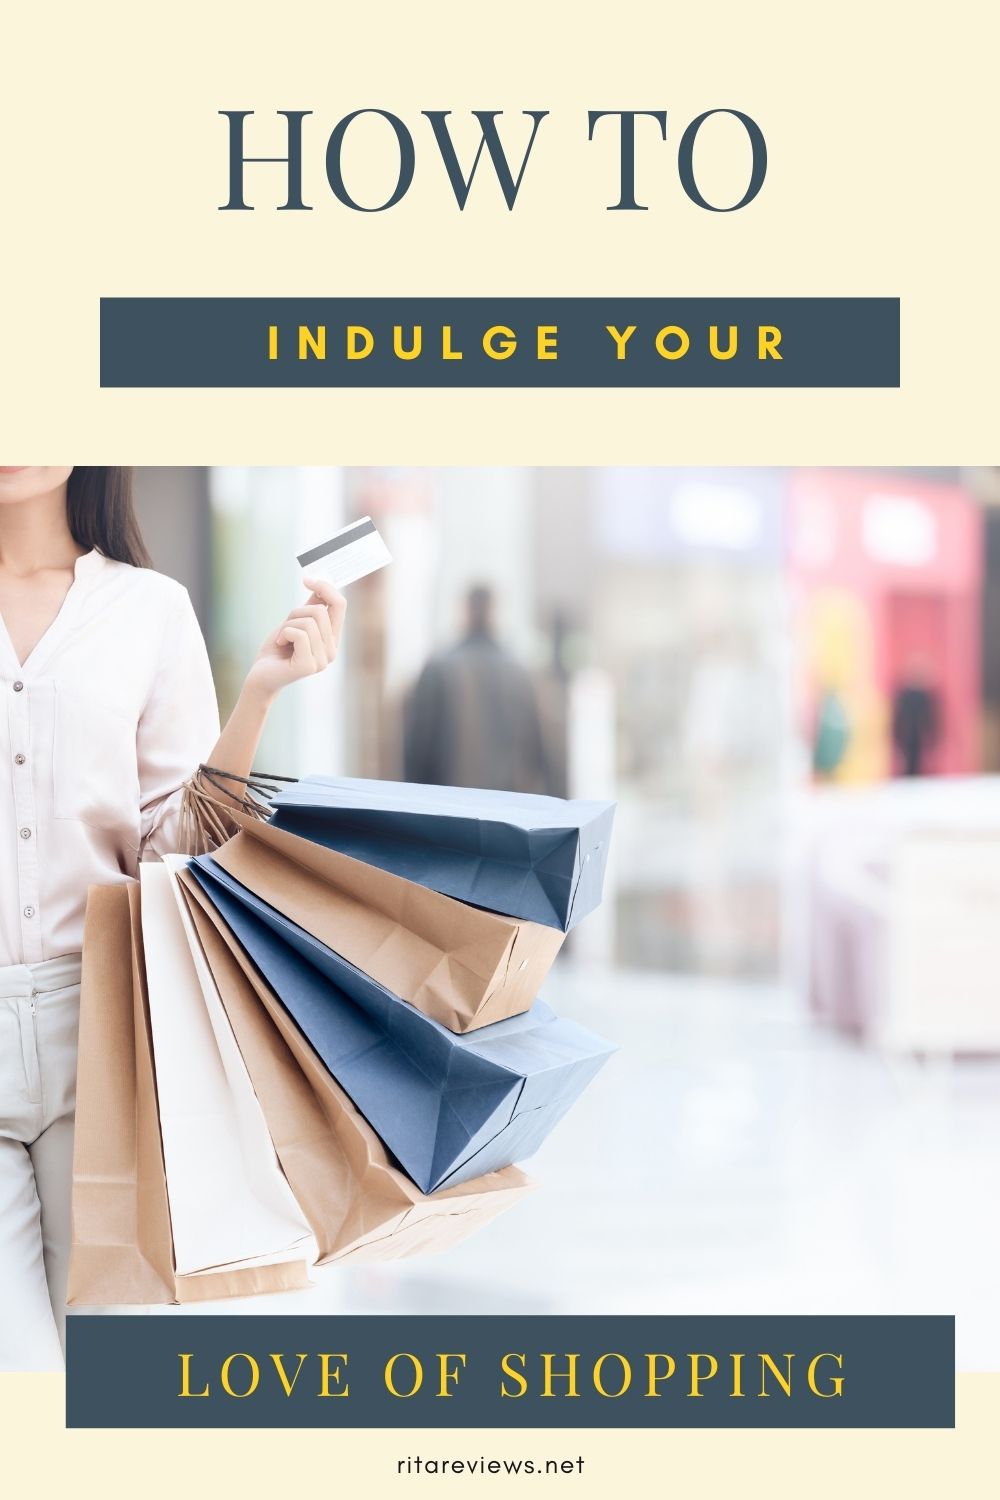 How to Indulge Your Love of Shopping While Earning/Saving Money